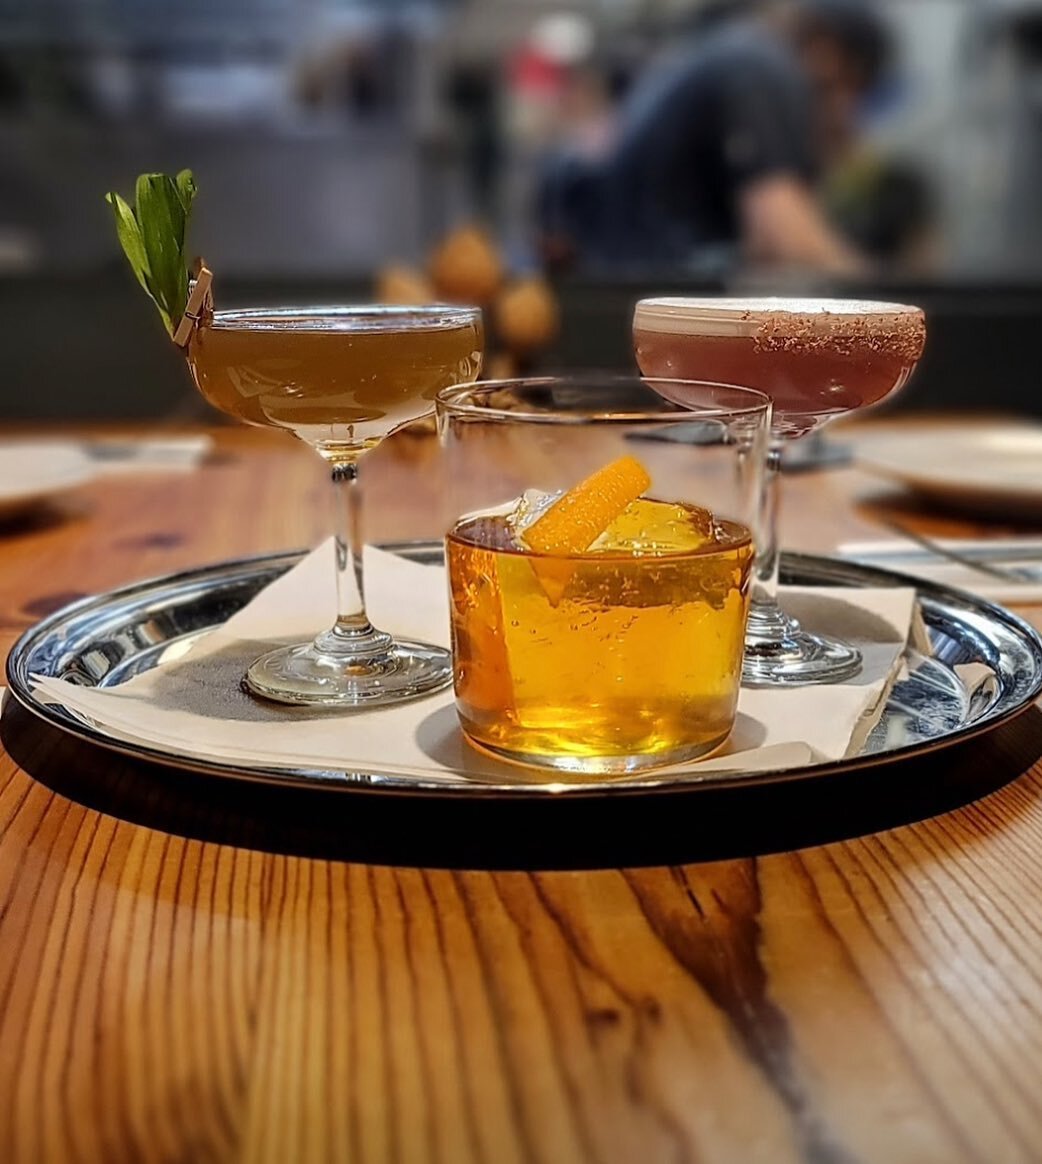 Come in and see what our bar is whipping up this week. It might be one or all of these. 

The Aged Black Ramp Martini 

Made with a delicate potato vodka and a brine from black fermented ramps that we made last season. 

The Crimson and Clover 

An i